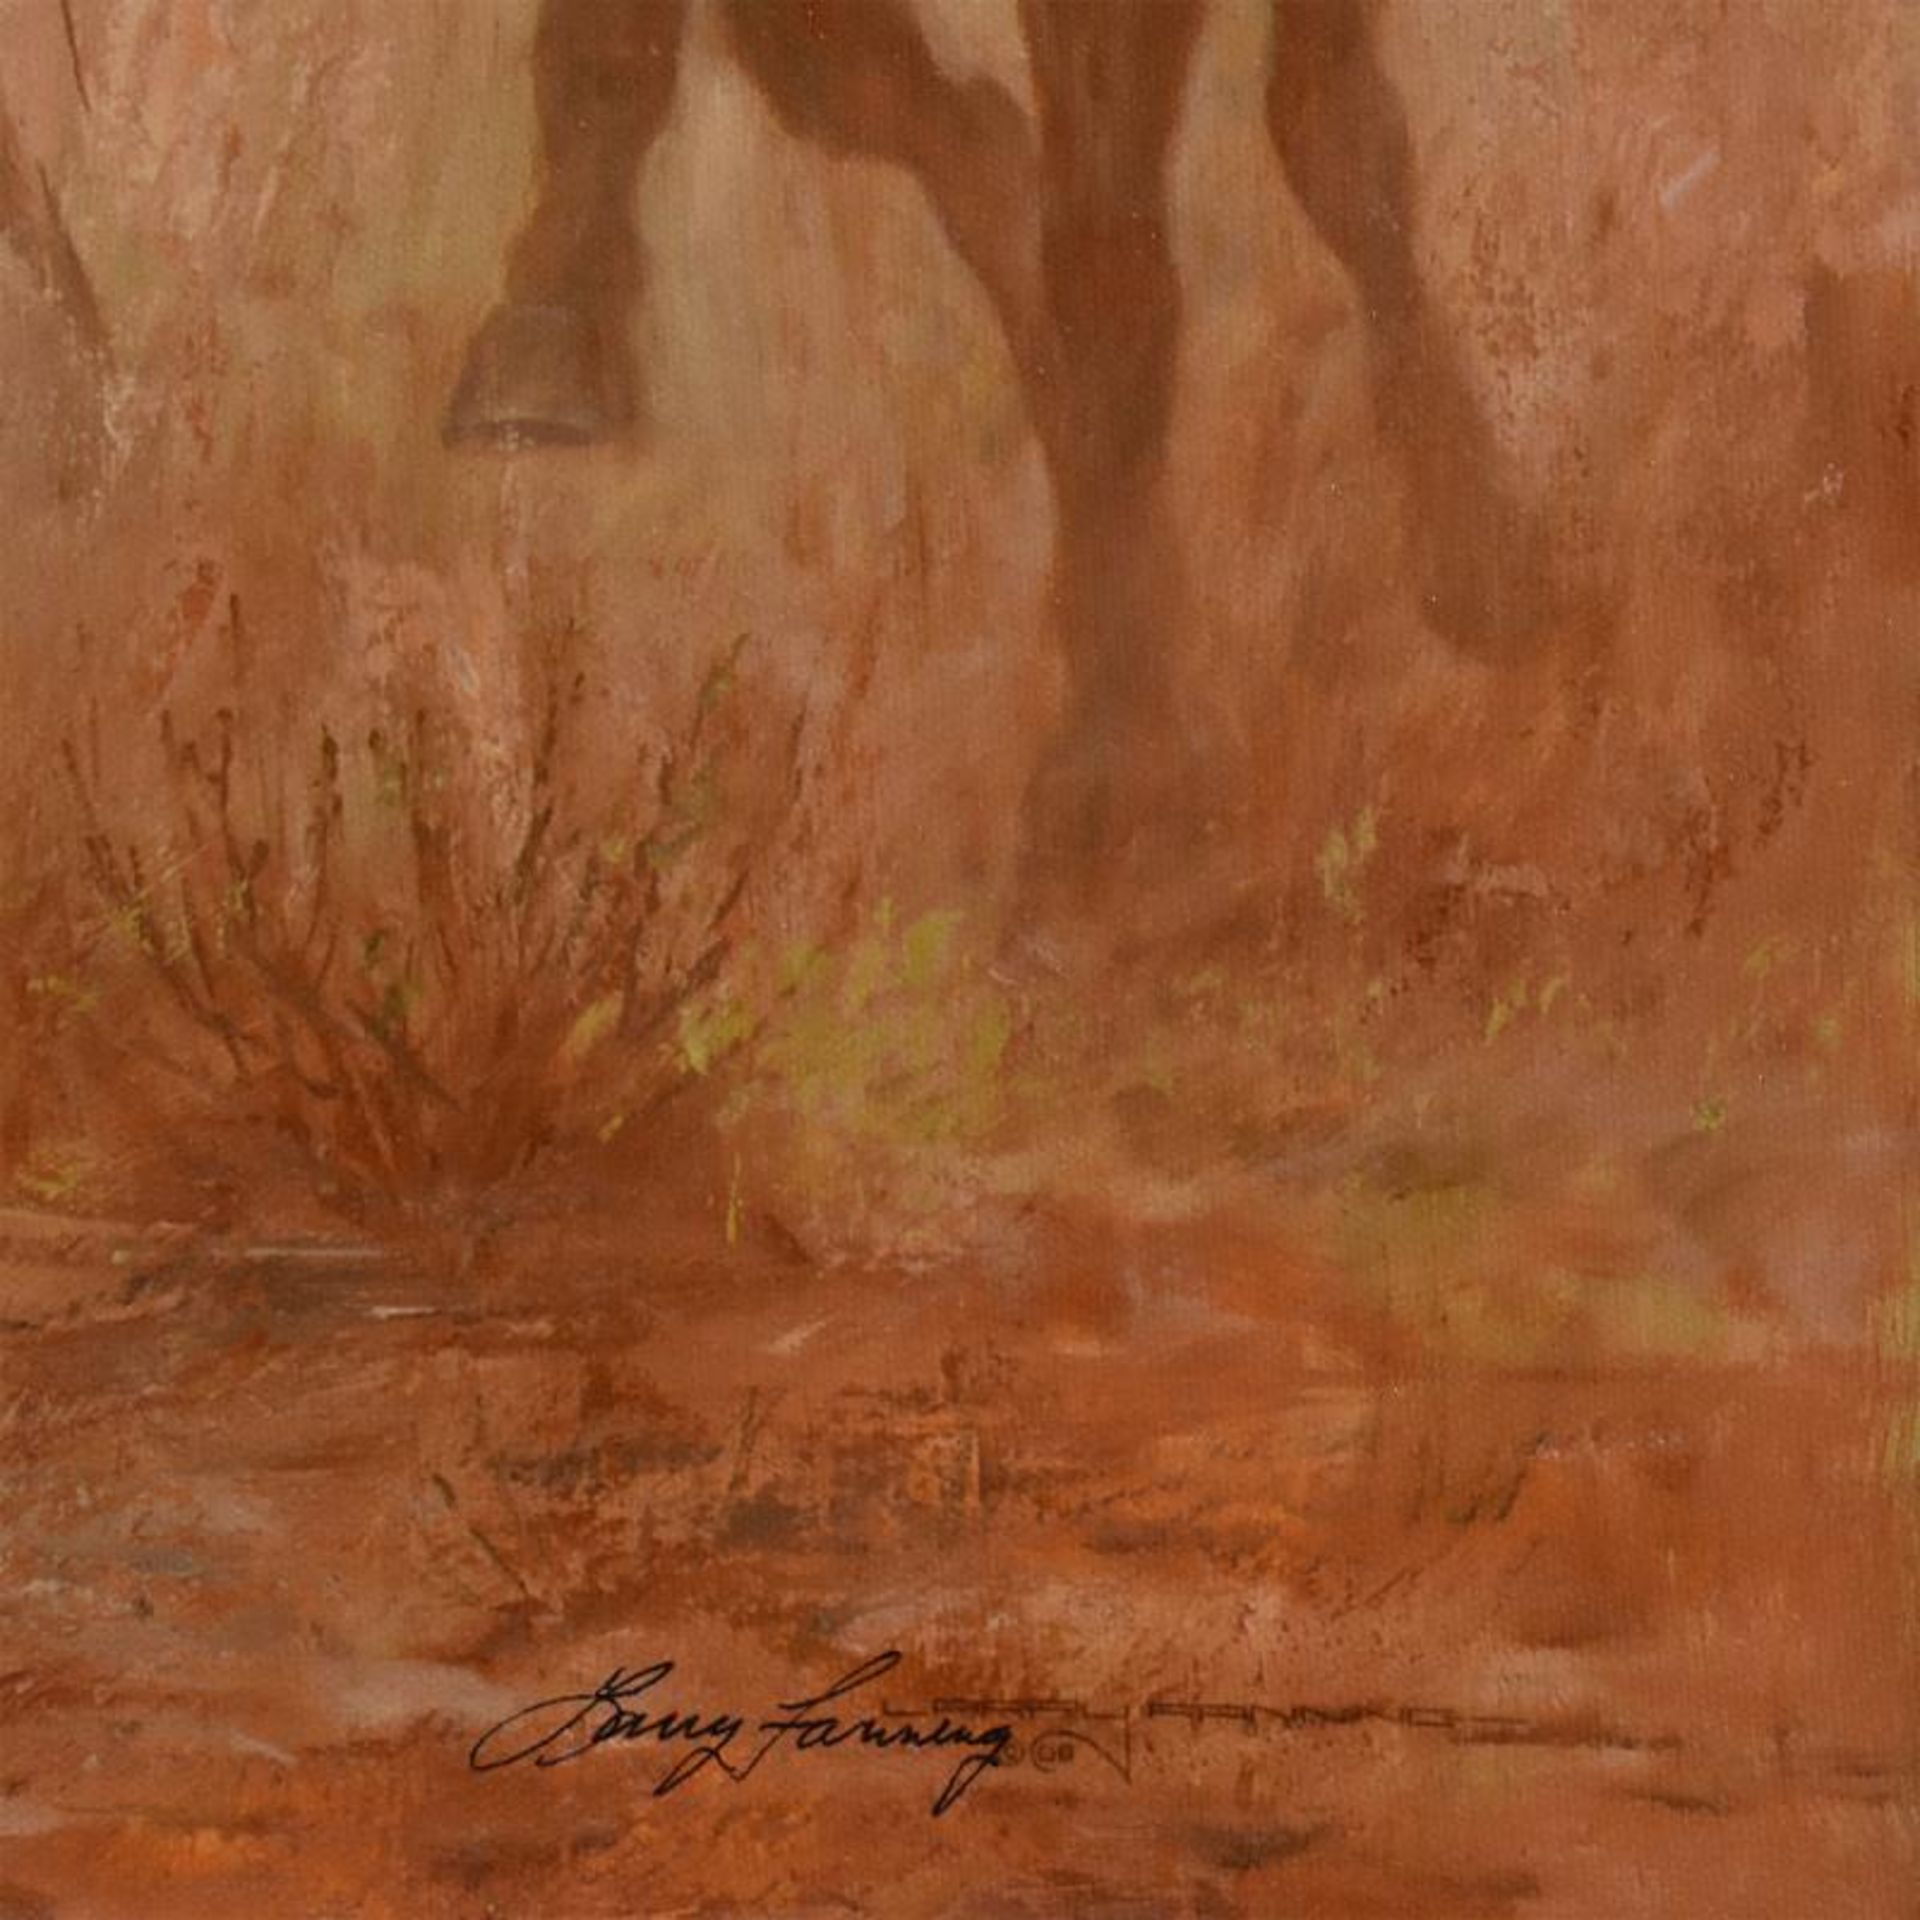 Larry Fanning, "Off To See The Elephant" Limited Edition on Canvas, AP Numbered - Image 2 of 3